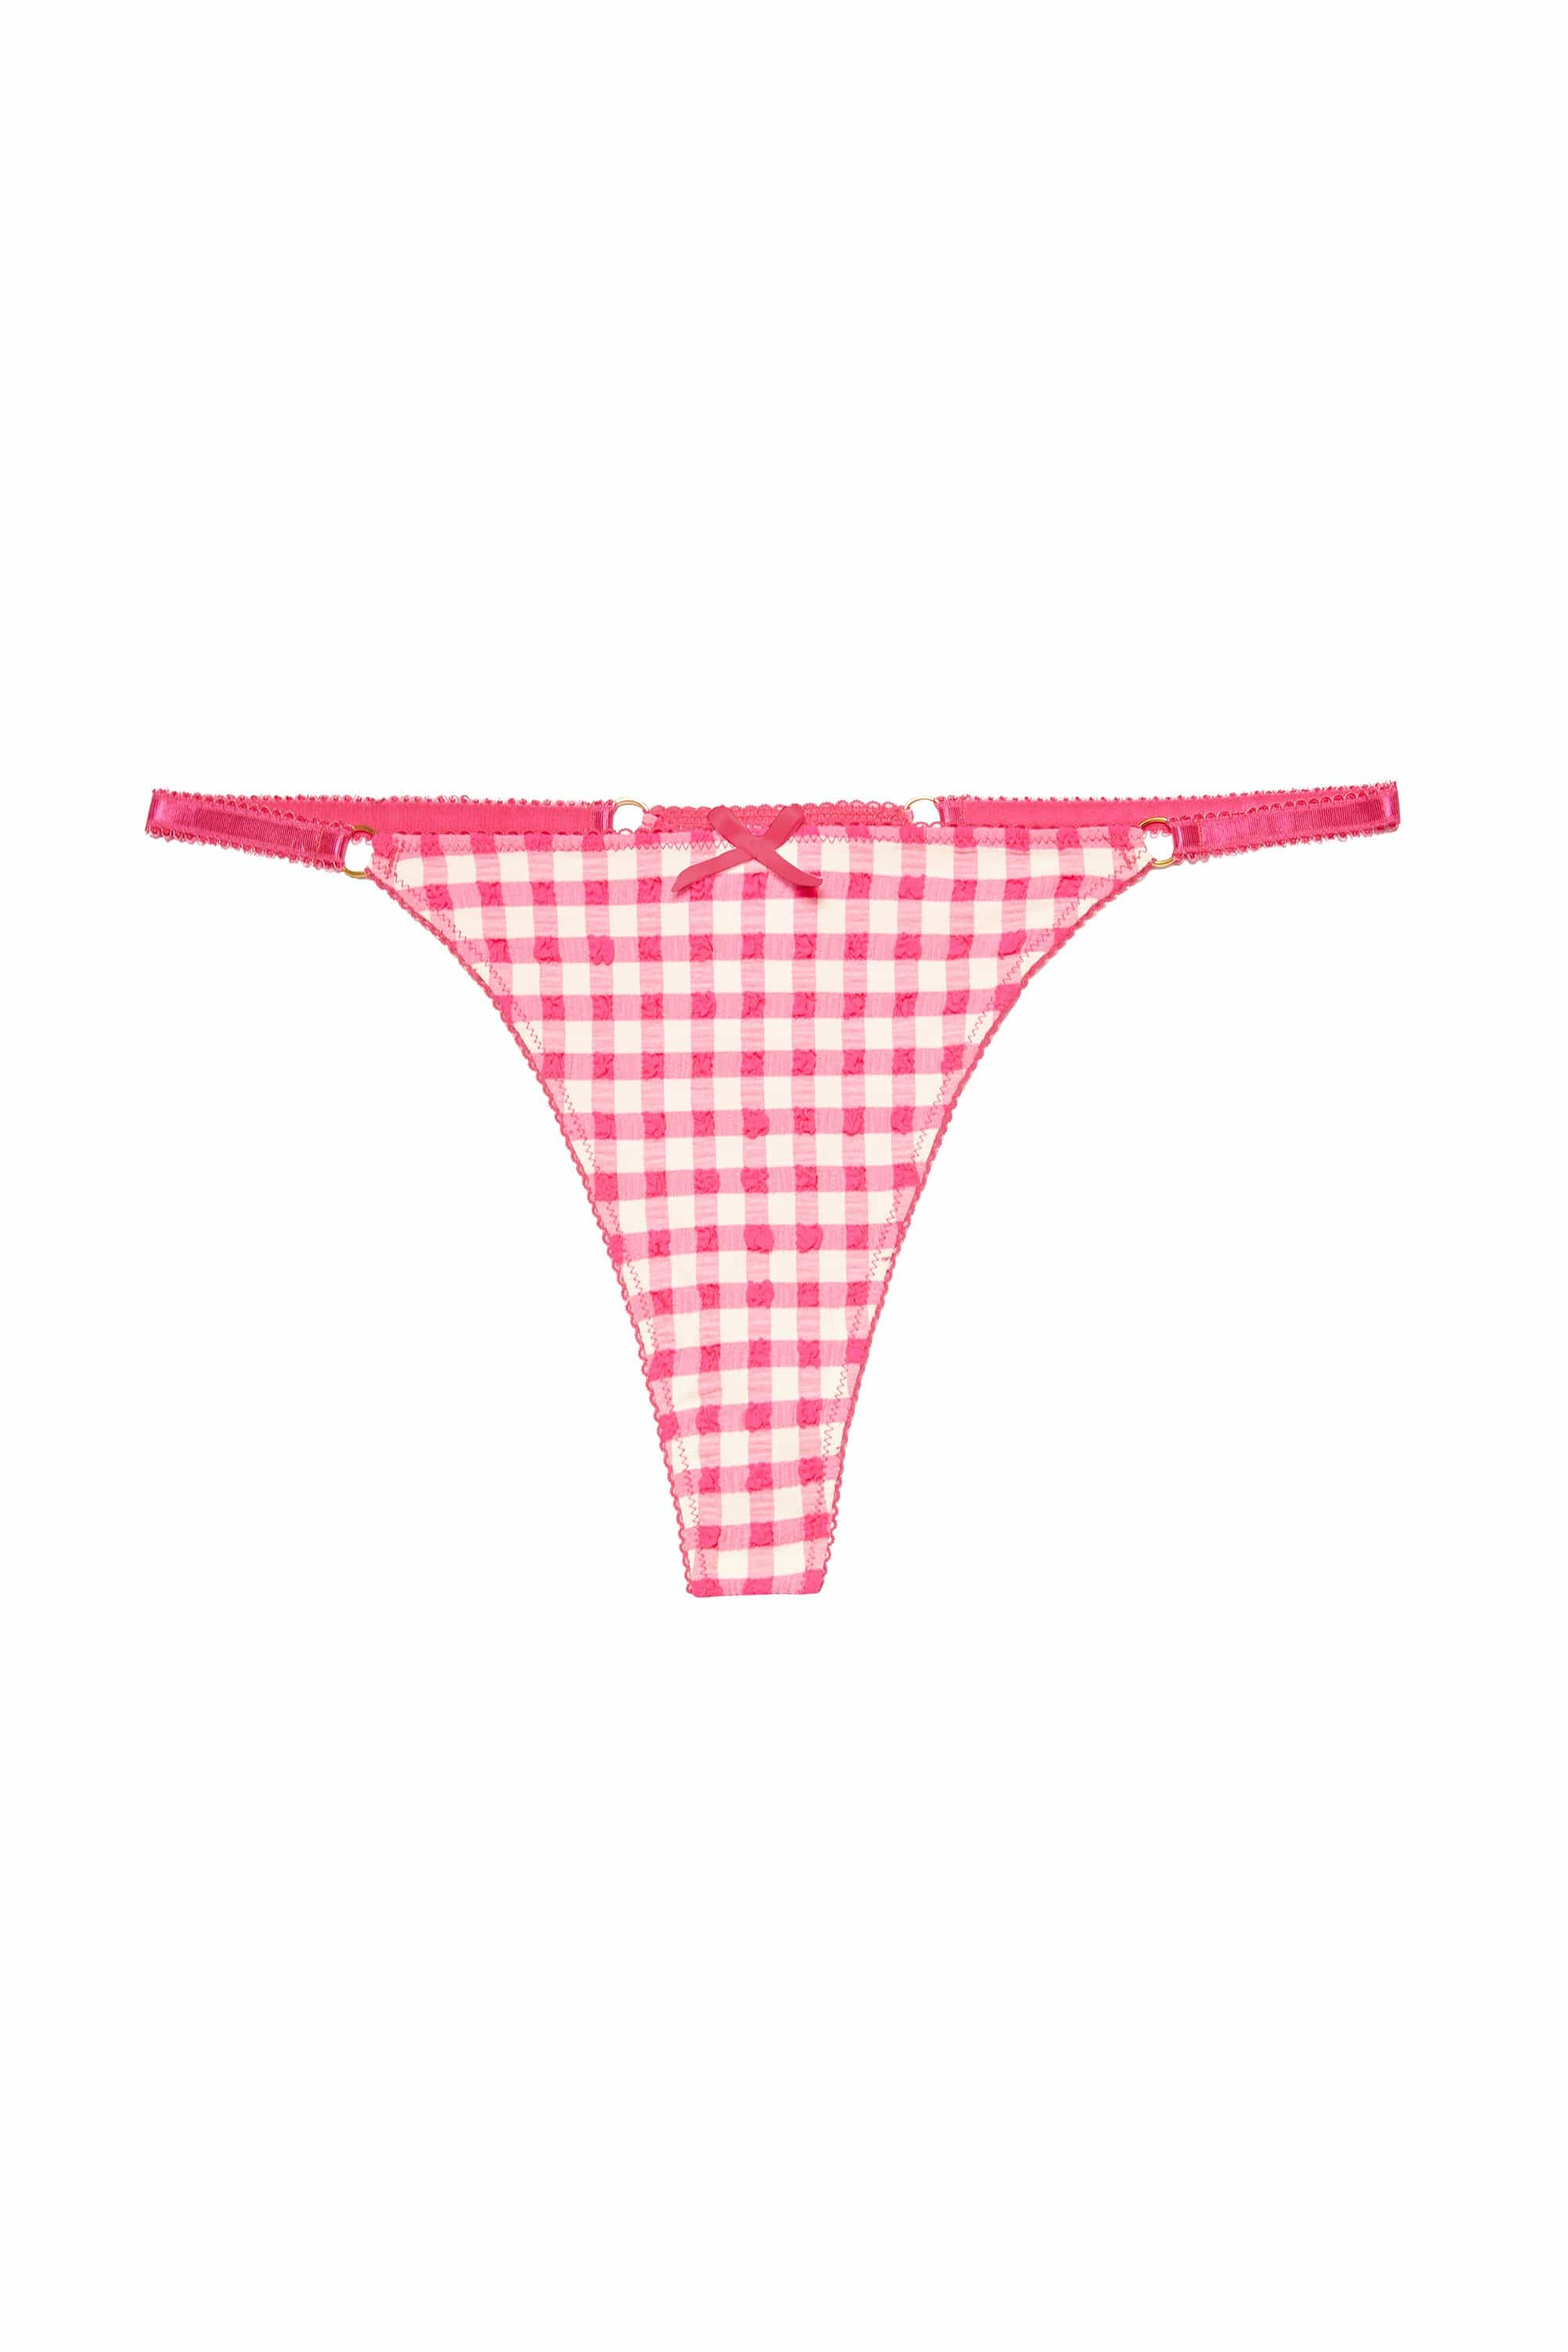 Daisy Pink Gingham Thong